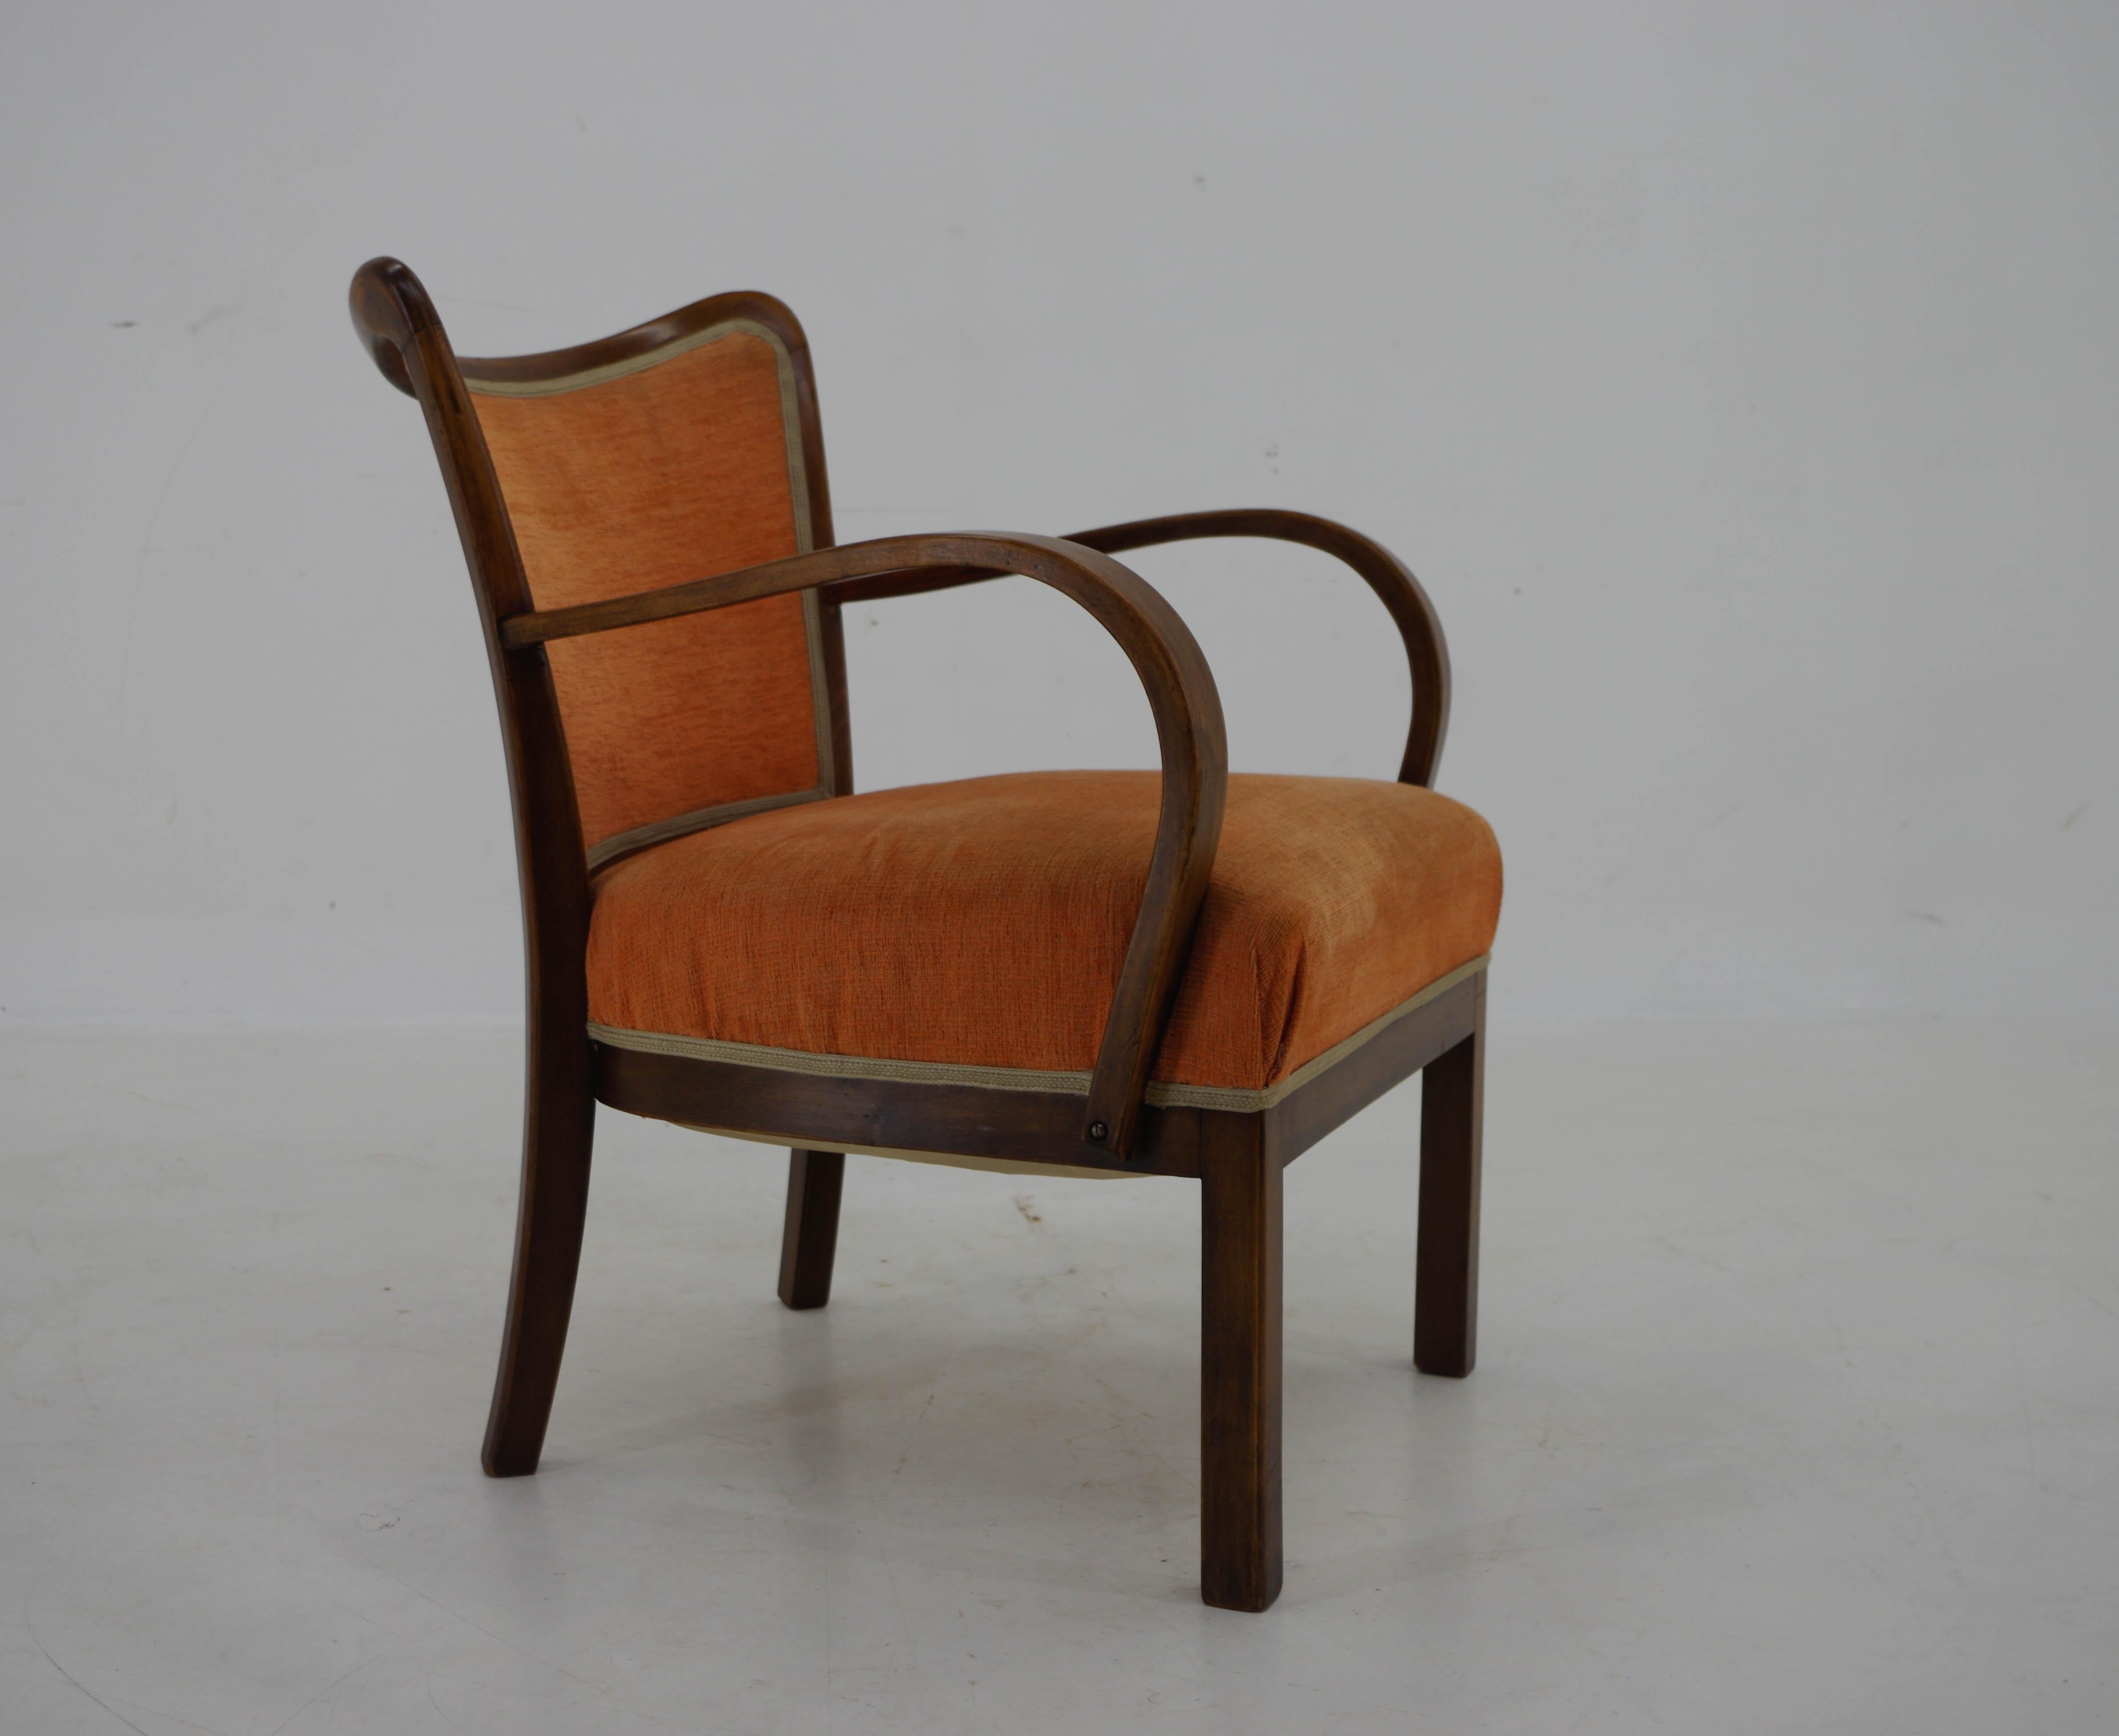 Elegant Art Deco armchair.
Very good original condition.
Shipping quote on request